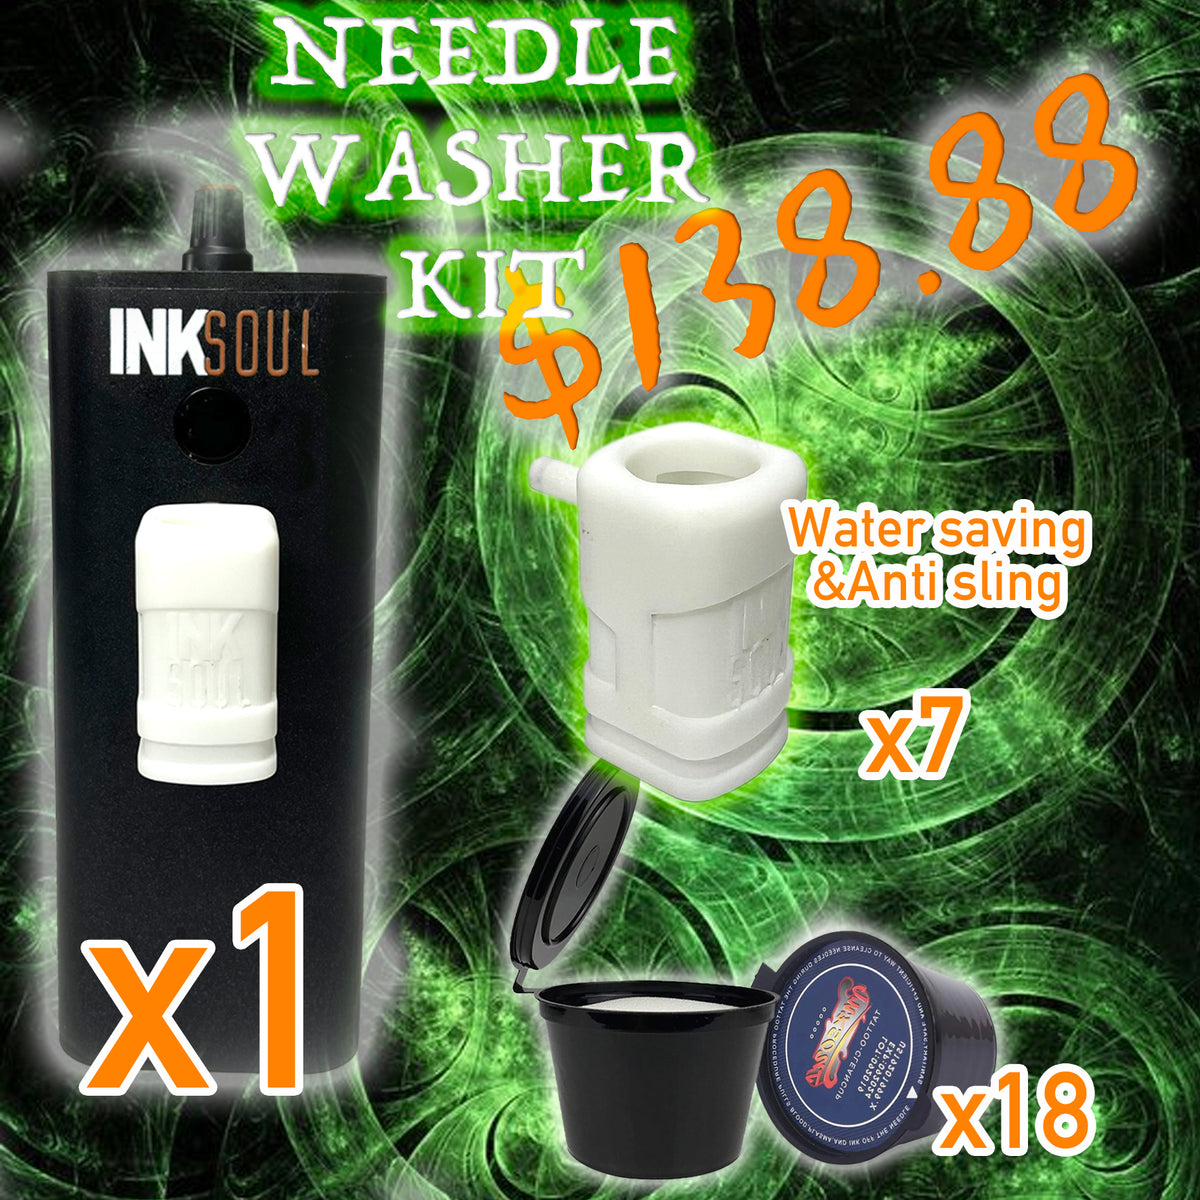 Needle Washer Kit(Needle Washer+Dip Cup Caps+Disposable accessories Pro）👍👍👍